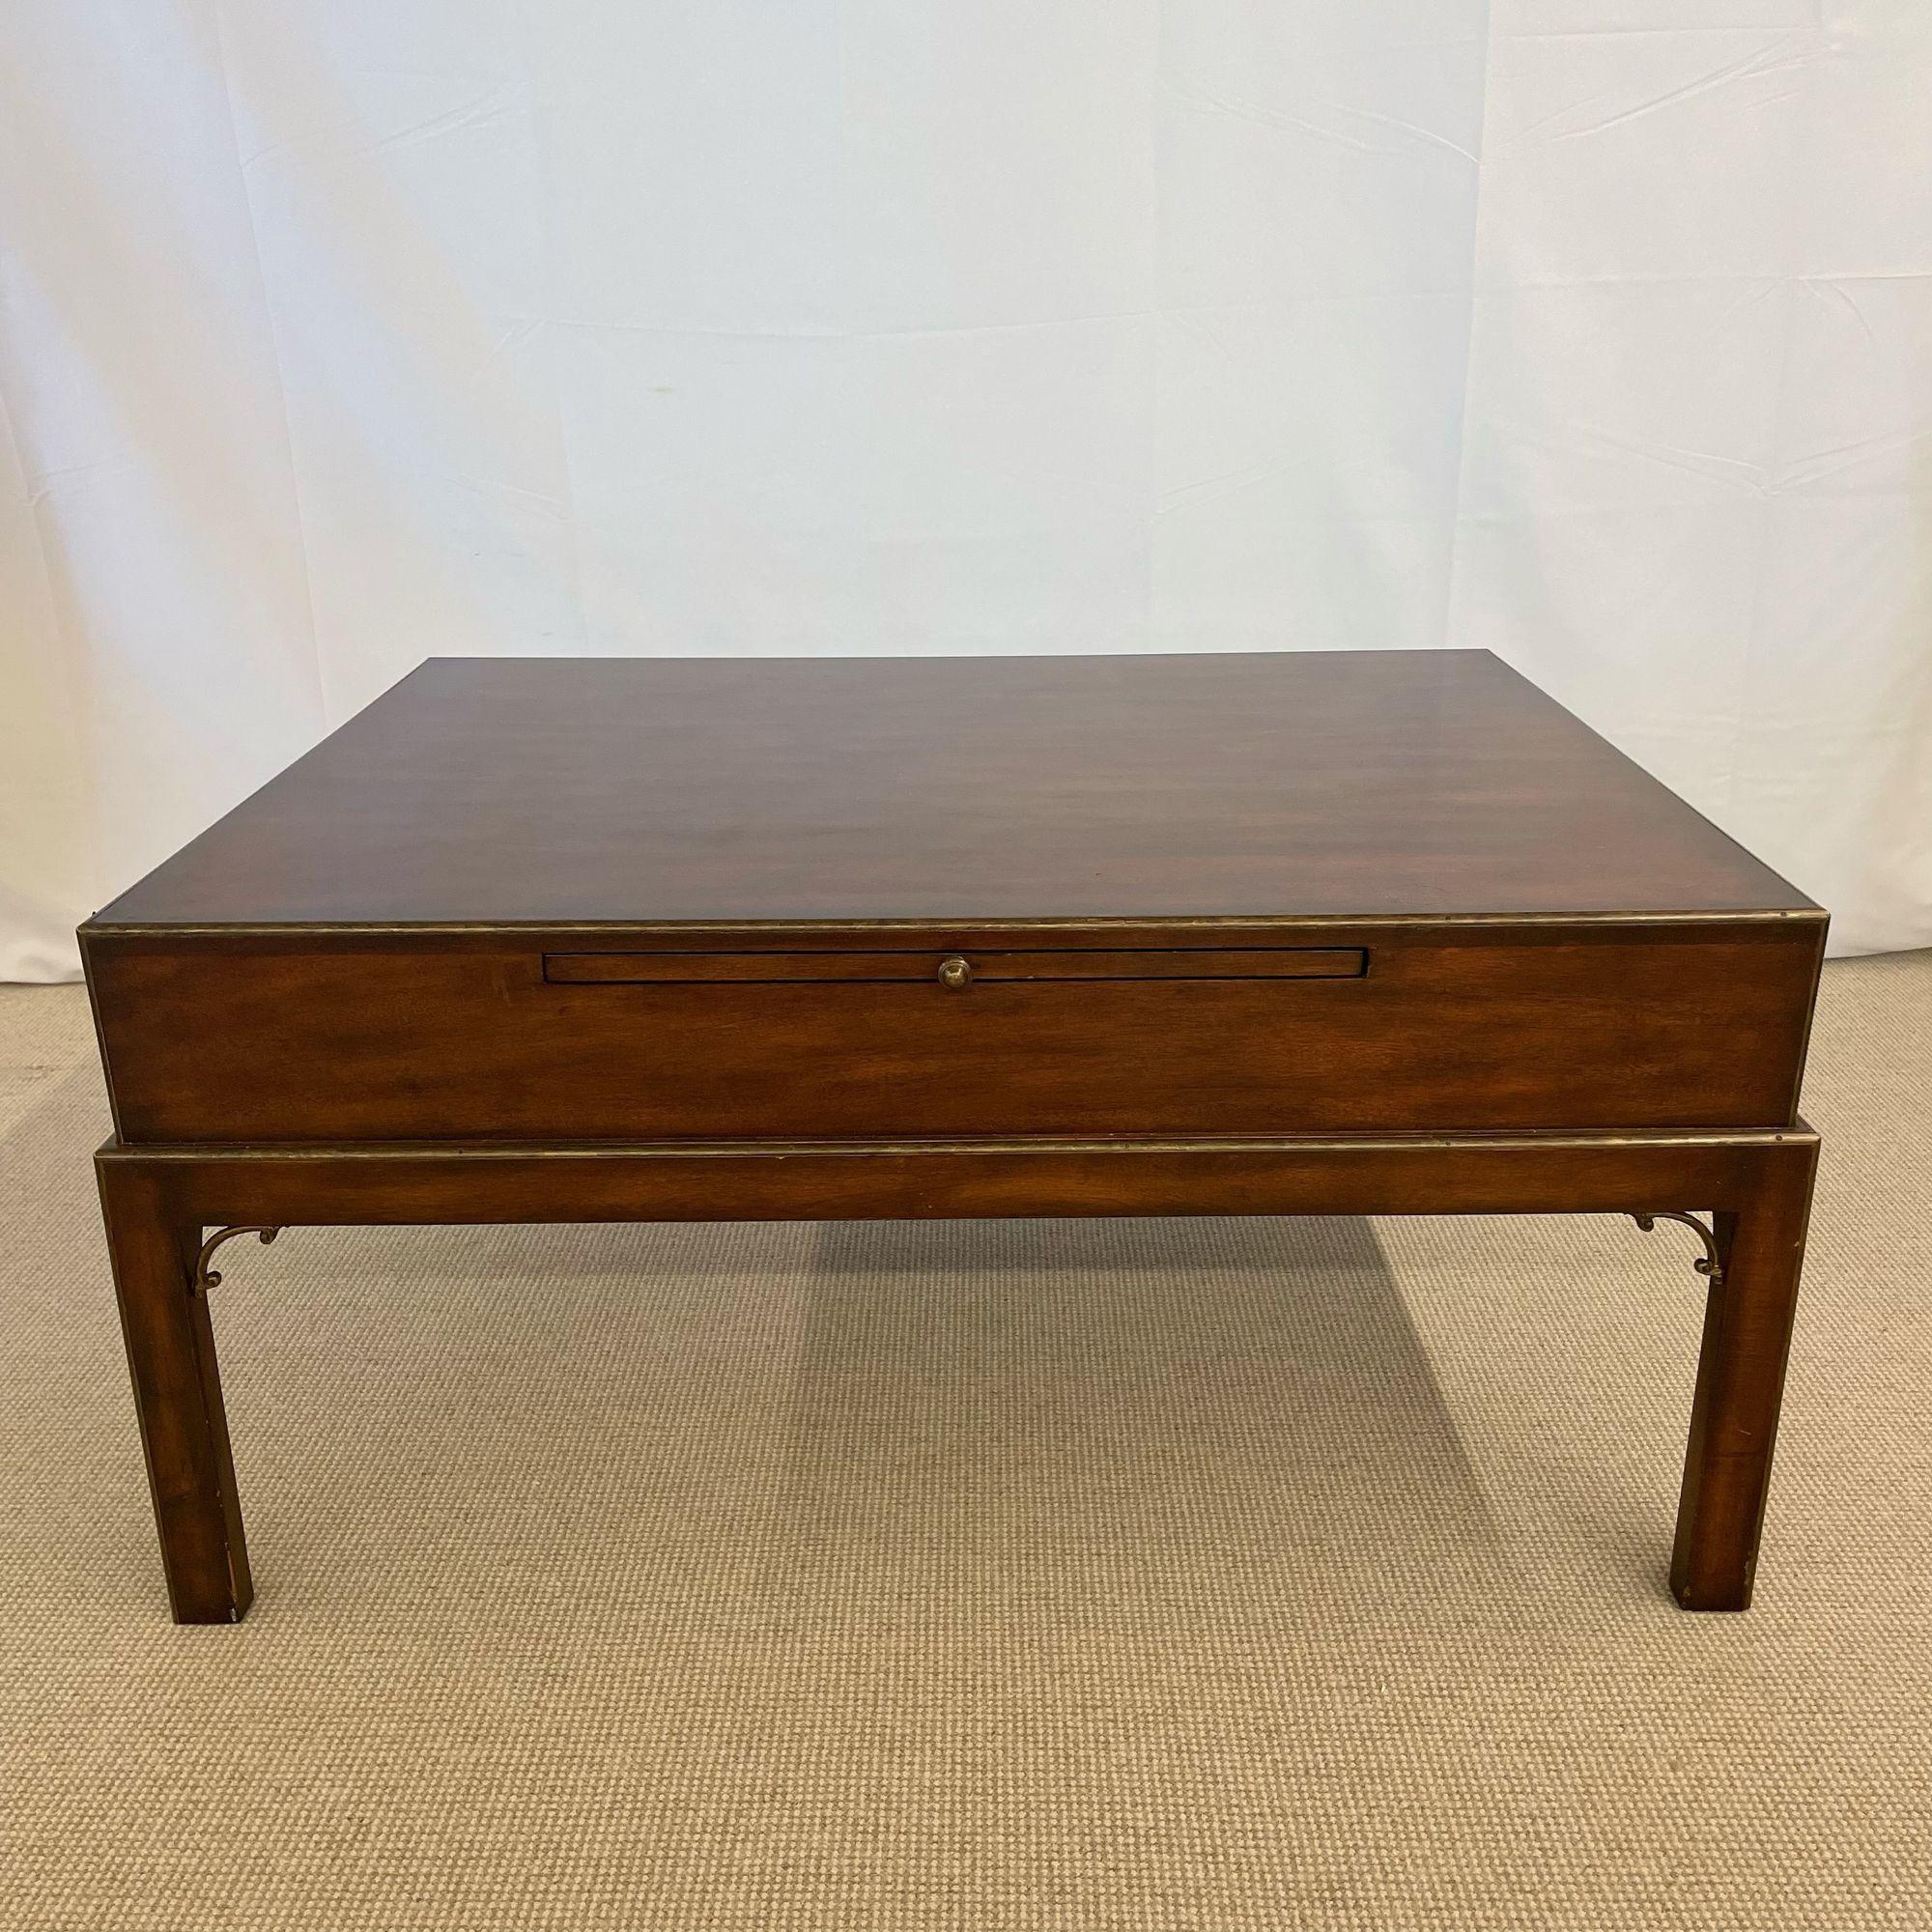 Theodore Alexander Campaign Style Square Coffee Table, Mahogany and Brass
 
This stylish coffee or cocktail table has a drawer on each end and a pull out tray on each of the opposing ends. Good Condition. 
 
 20.25H x 43Wx33D
 